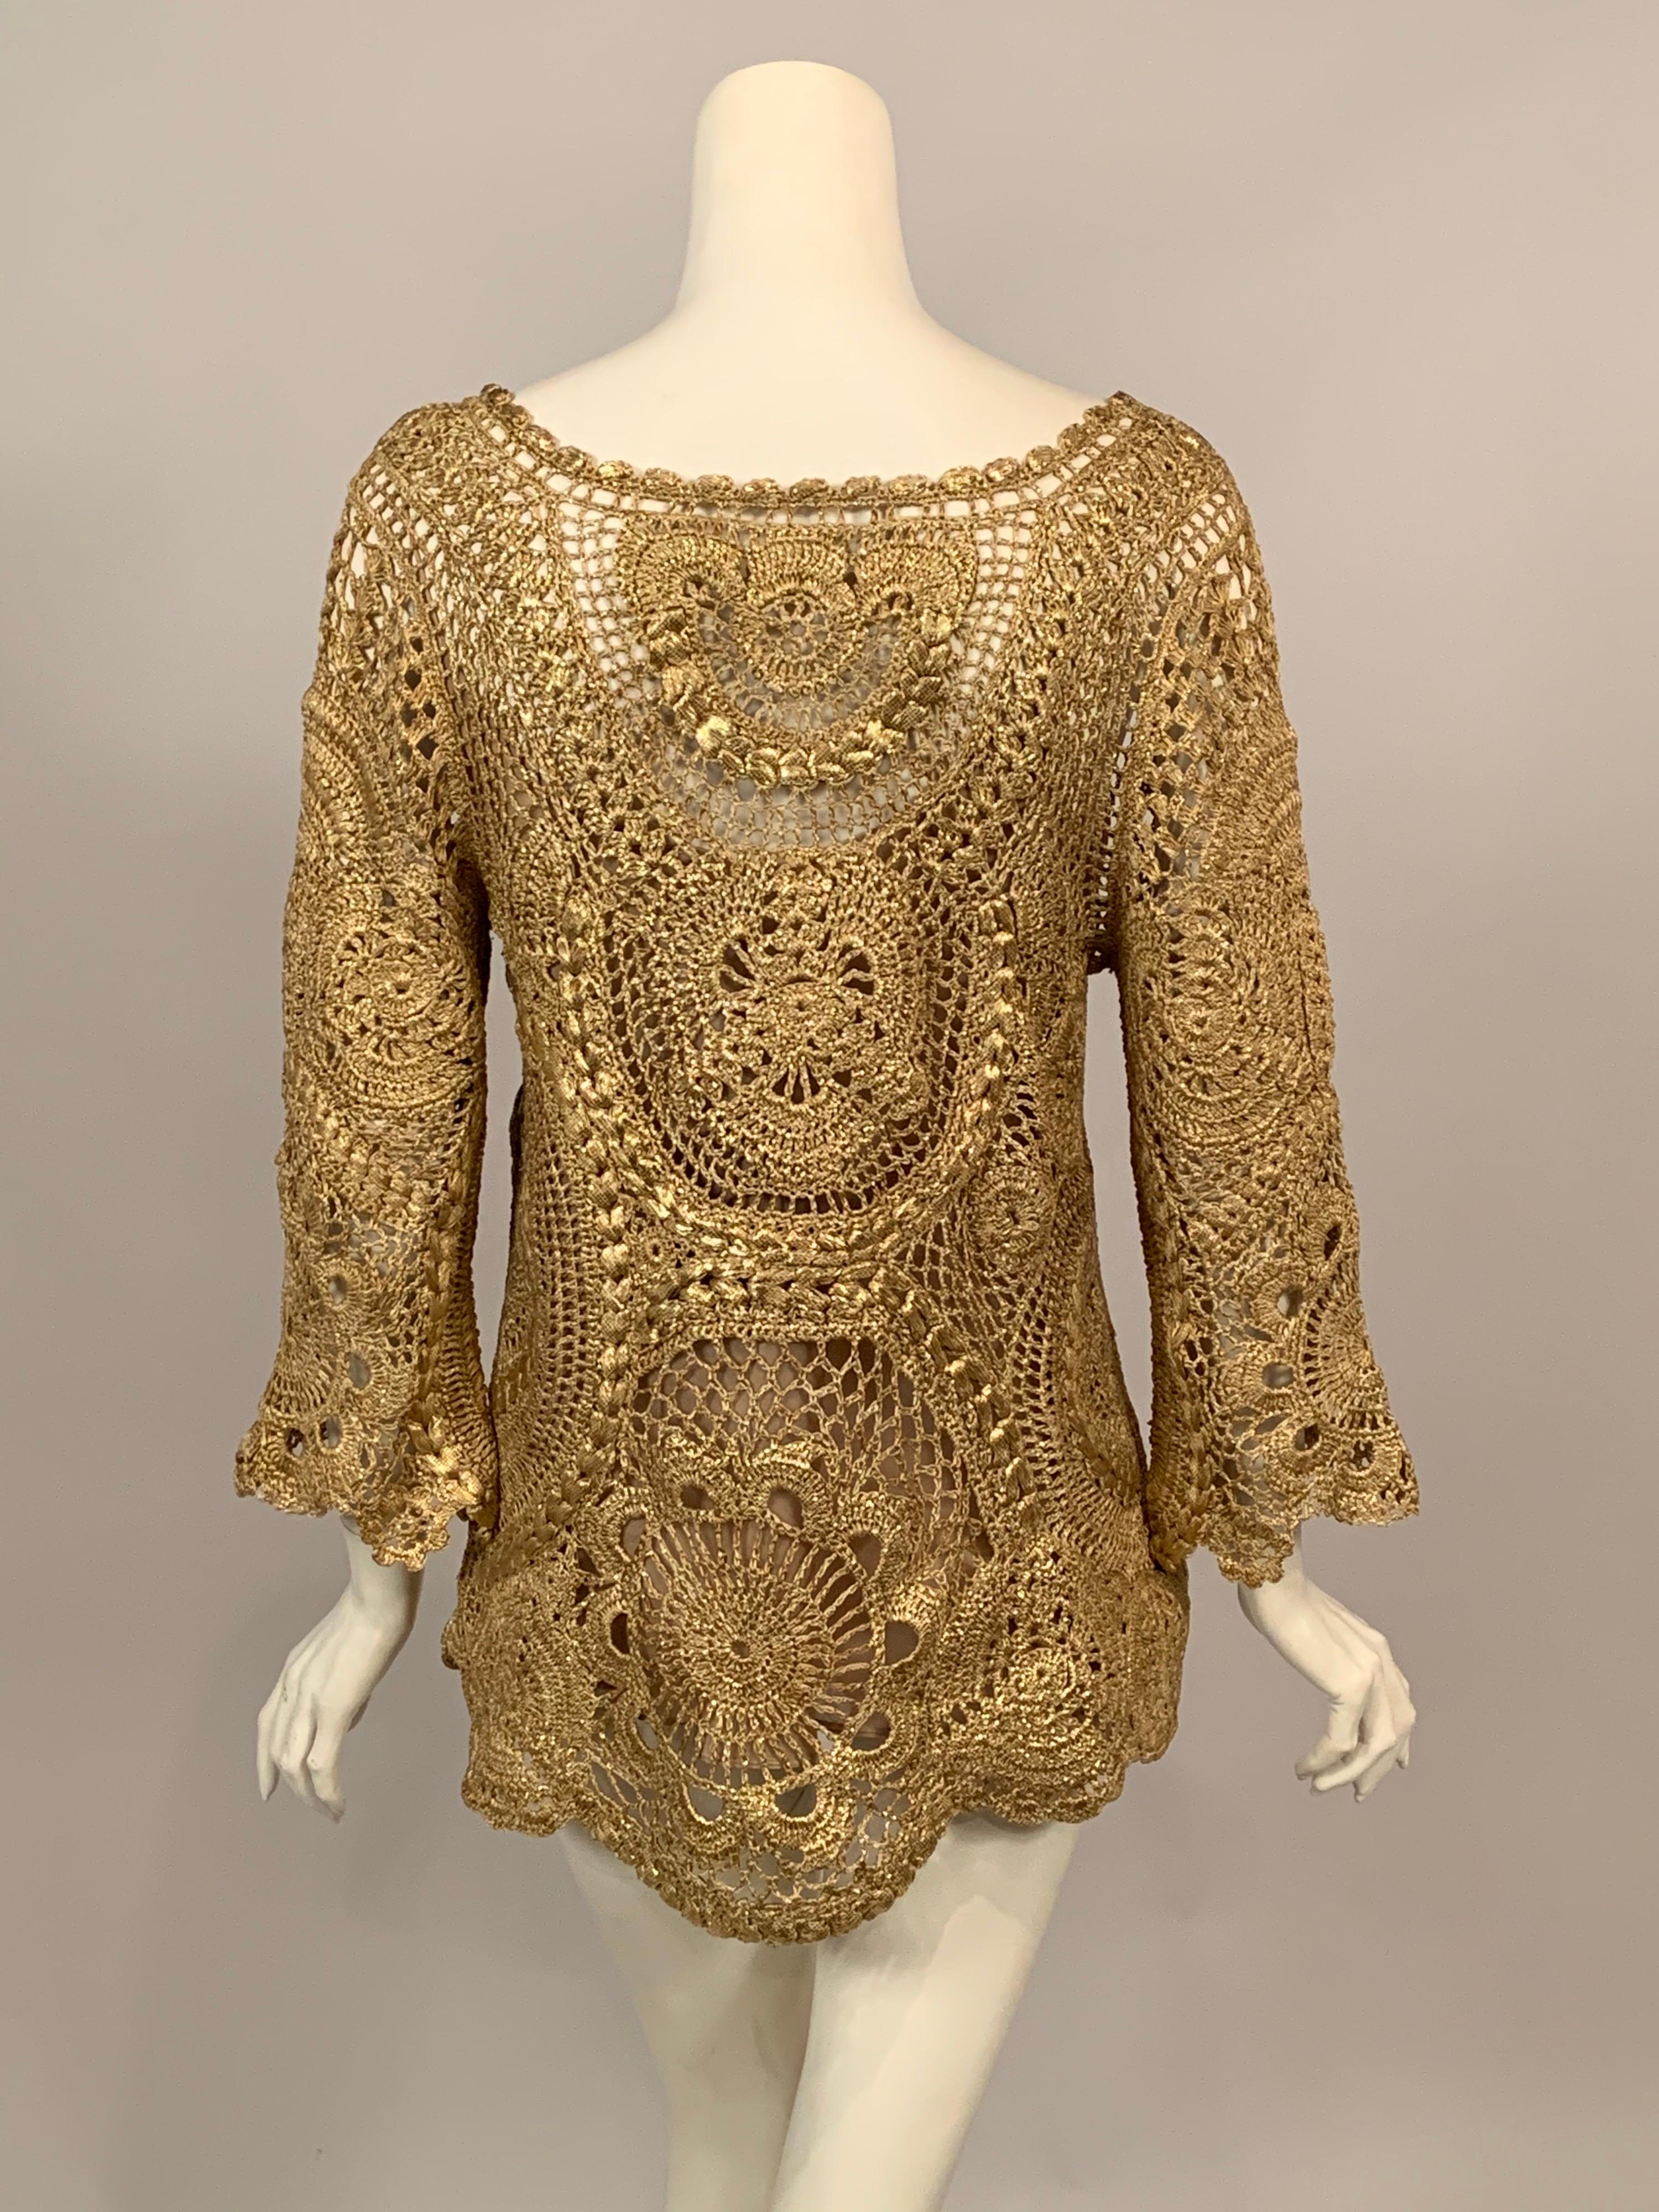 Oscar de la Renta Gold Hand Crocheted Silk Tunic and Camisole Original Tags  In New Condition For Sale In New Hope, PA